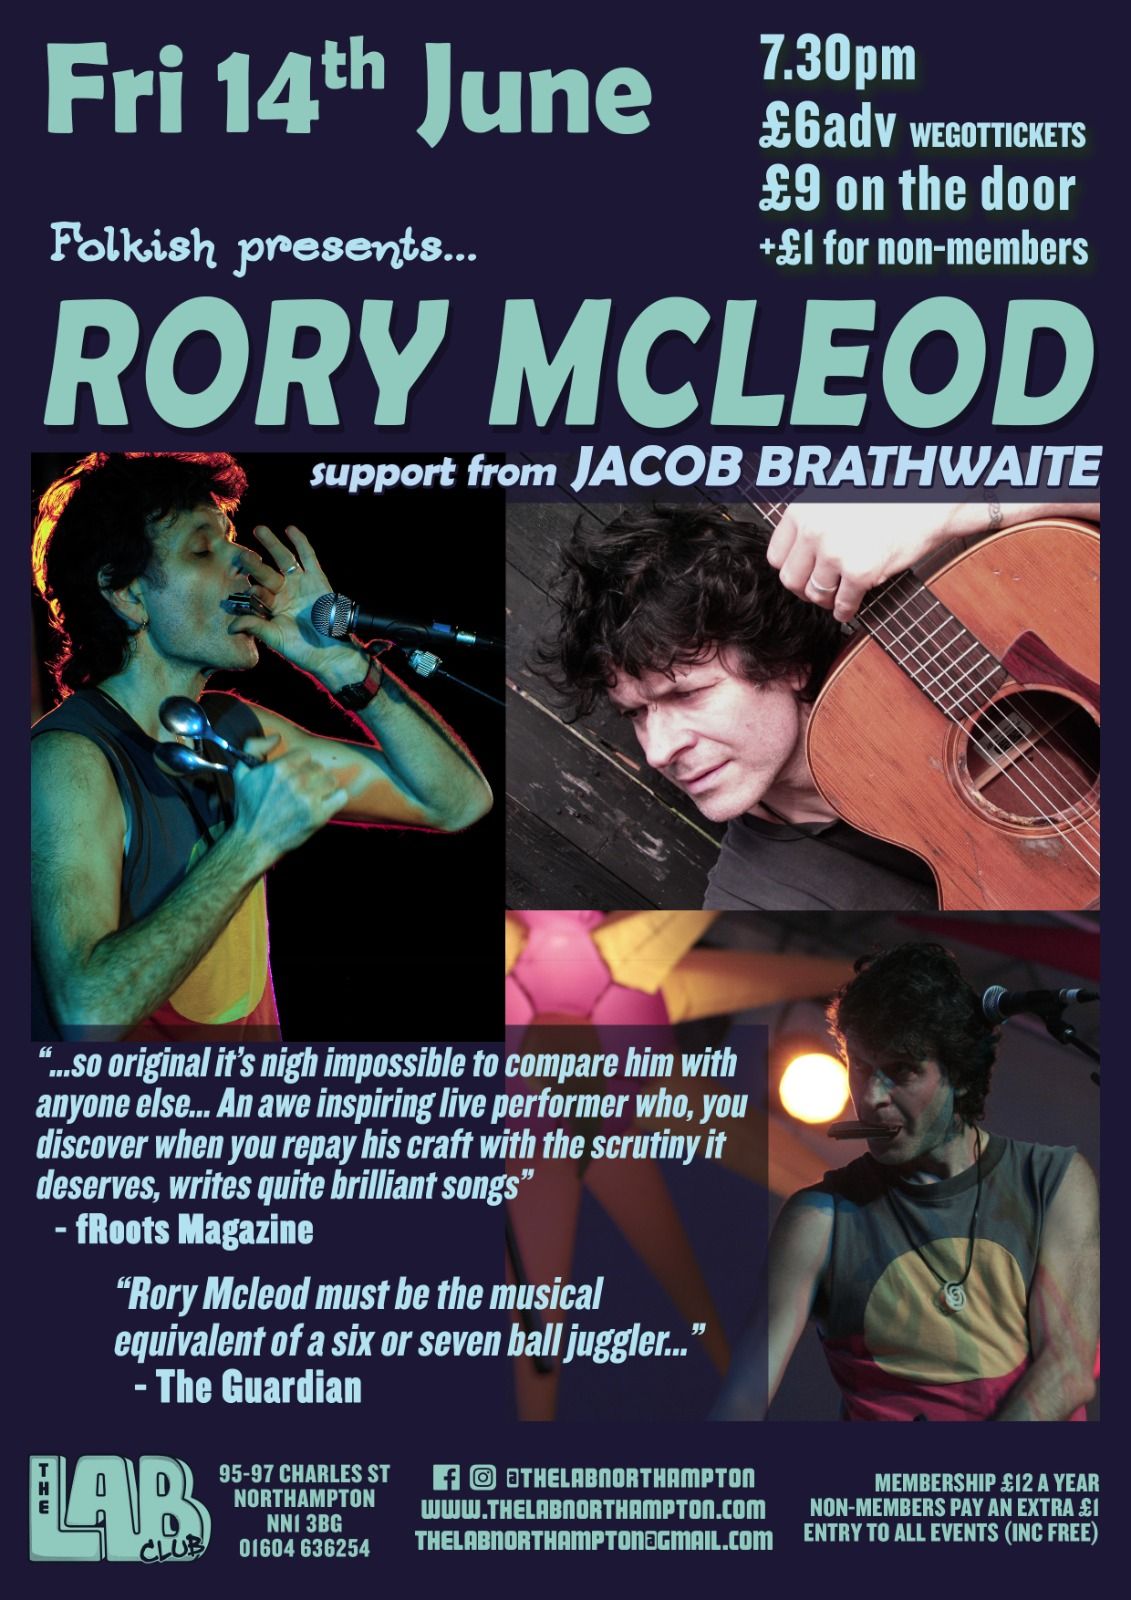 Rory McLeod with Support from Jacob Brathwaite